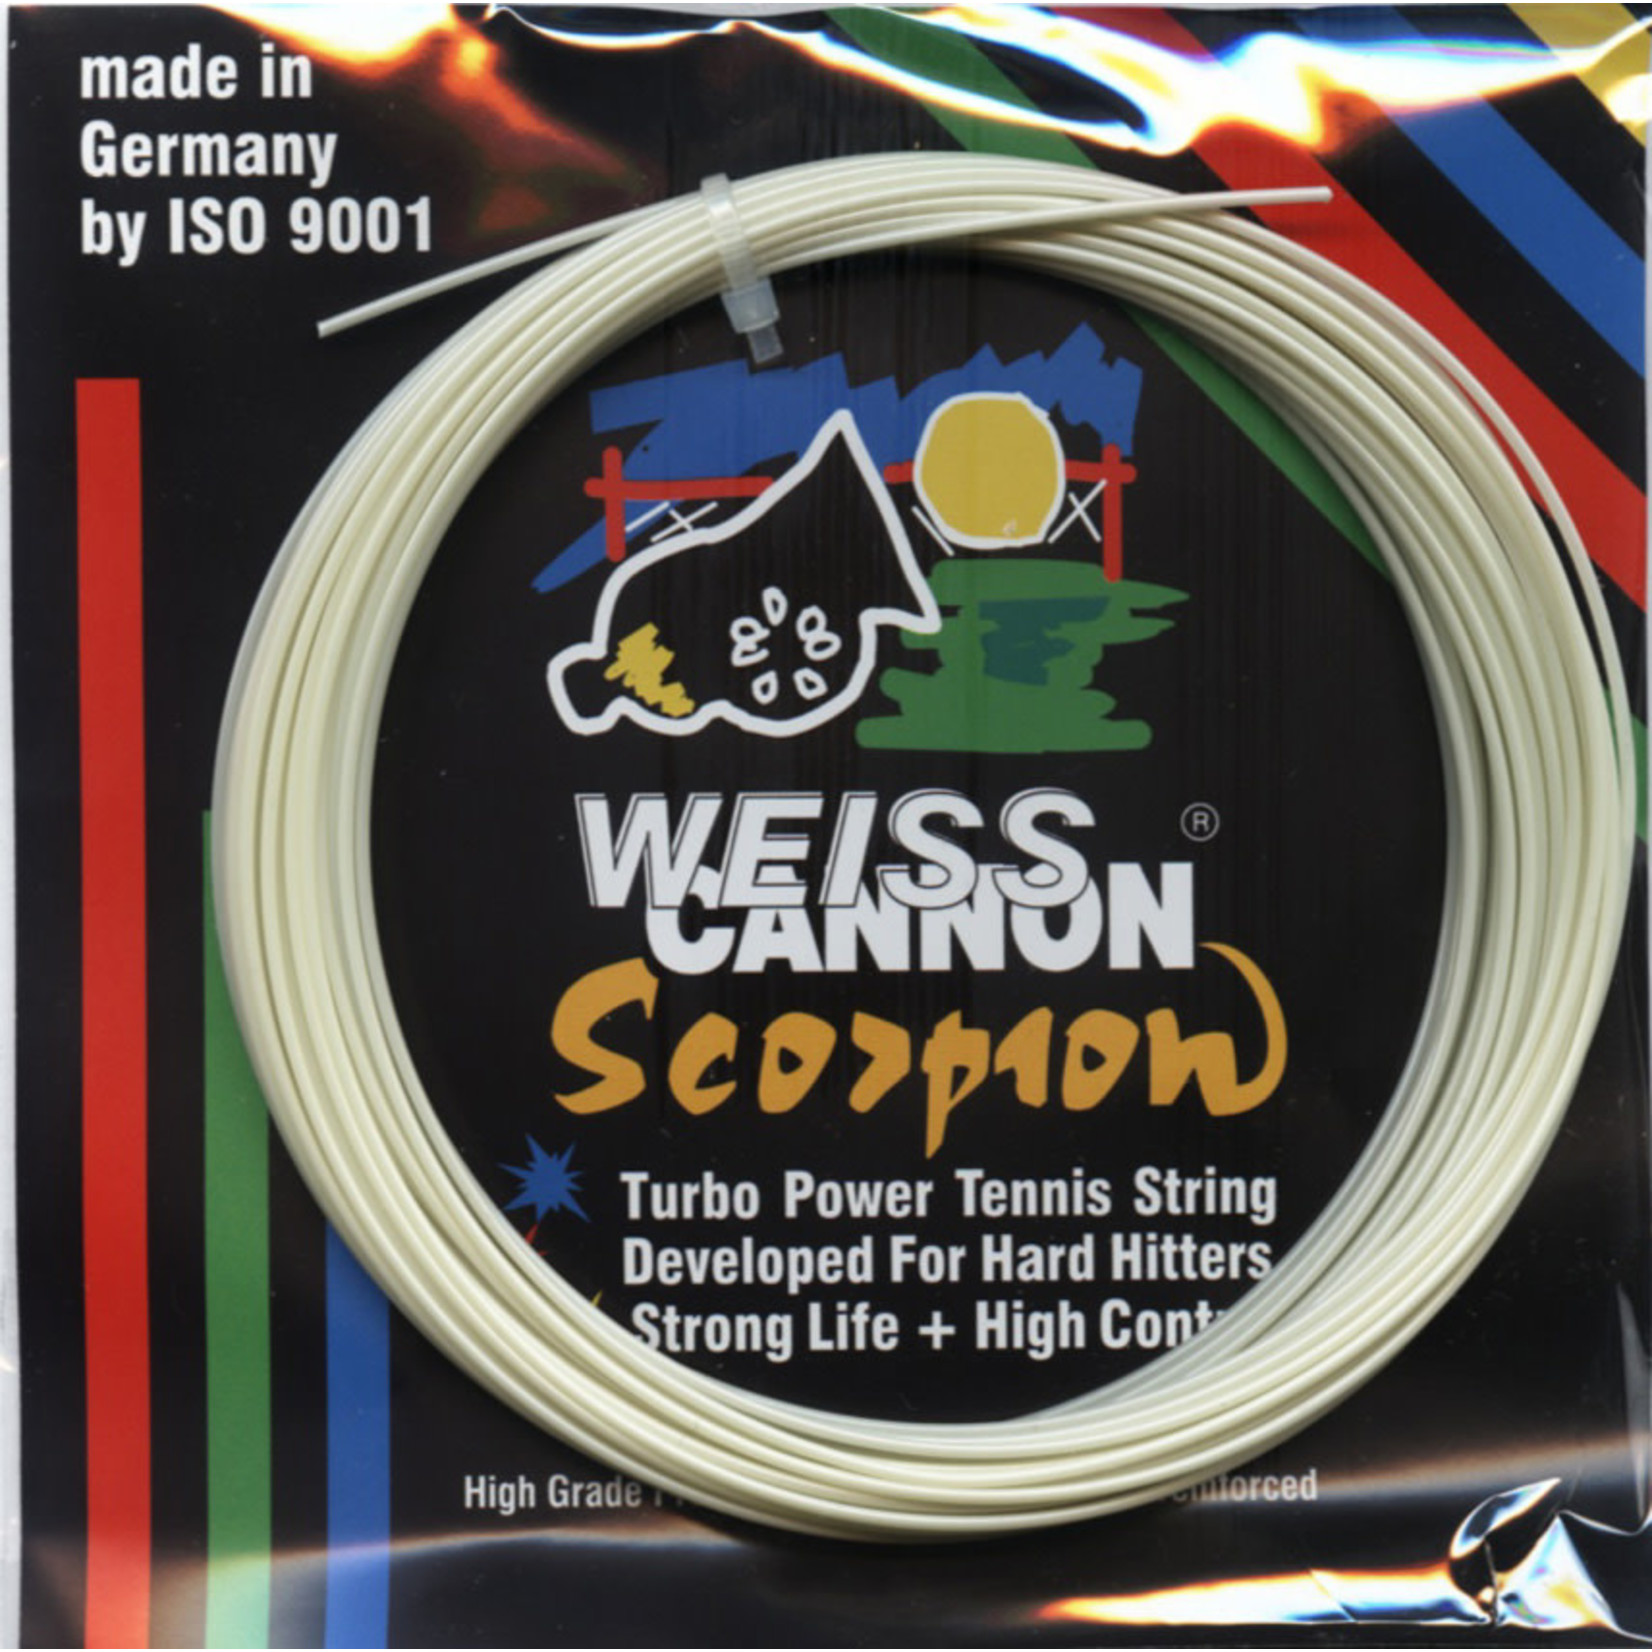 Weiss Cannon Weiss Cannon Scorpion Tennis Strings